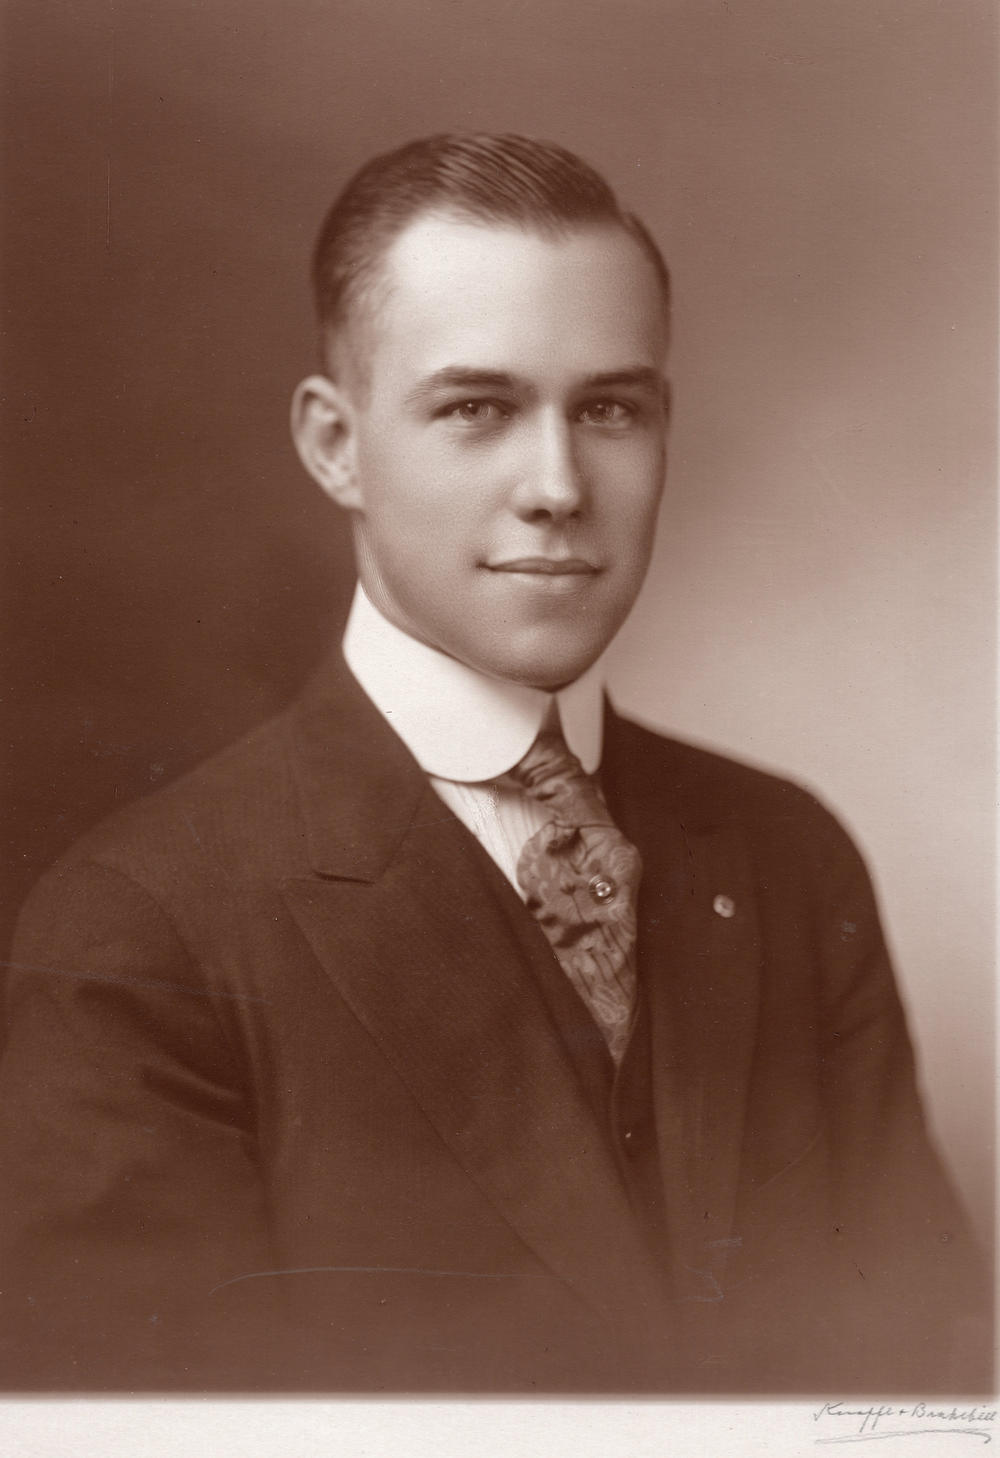 At age 24, Harry T. Burn was the youngest member of the Tennessee legislature in 1920.